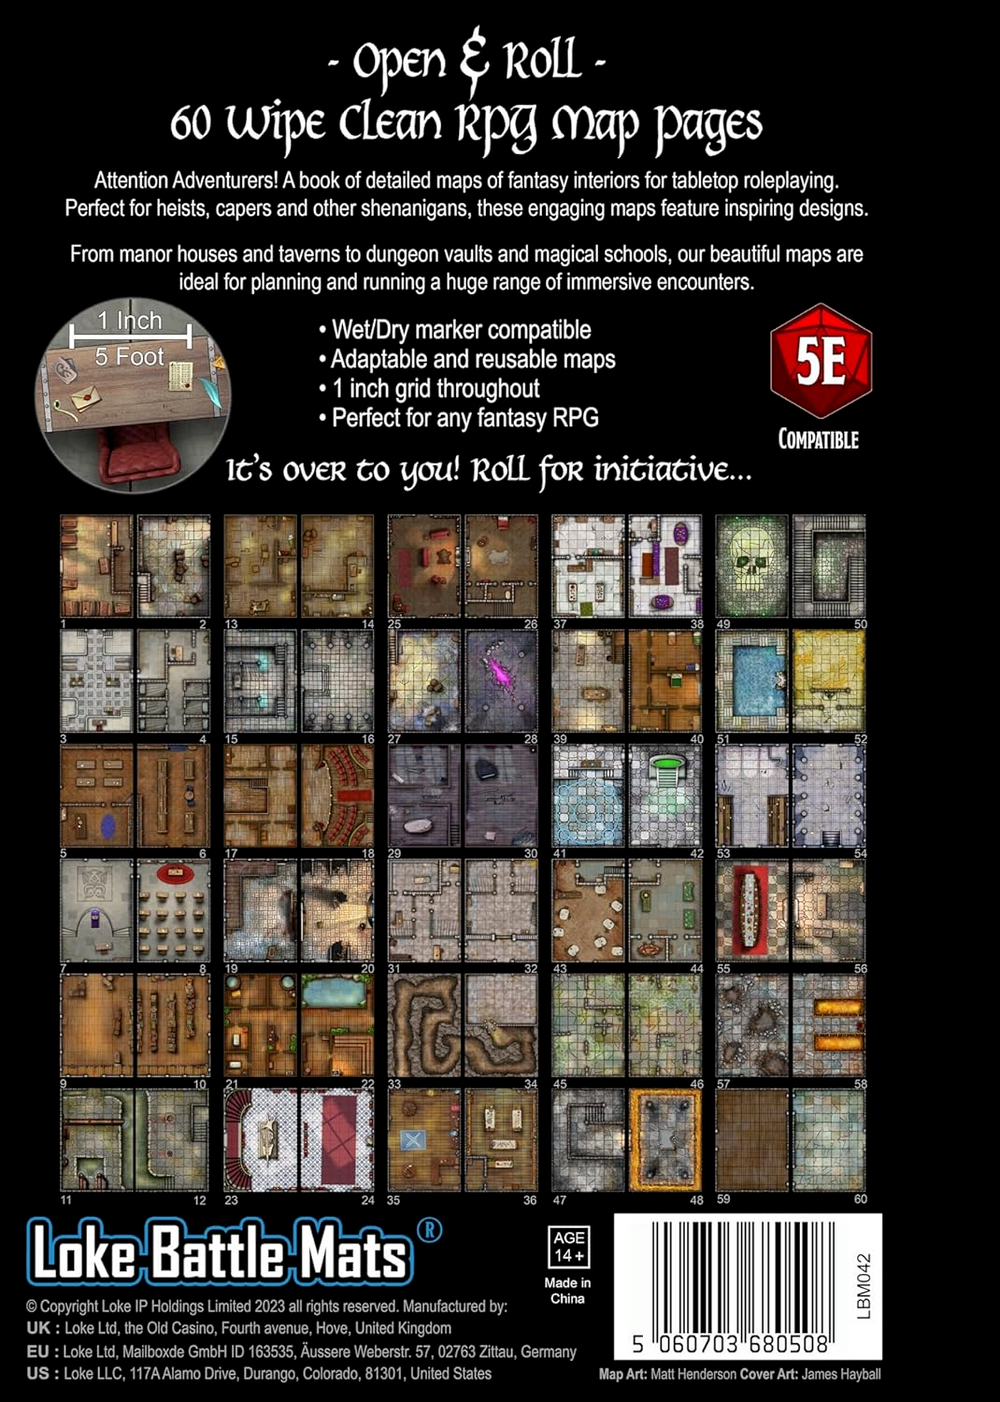 Big Book of Battle Mats Rooms Vaults & Chambers by Loke, Board Game Maps